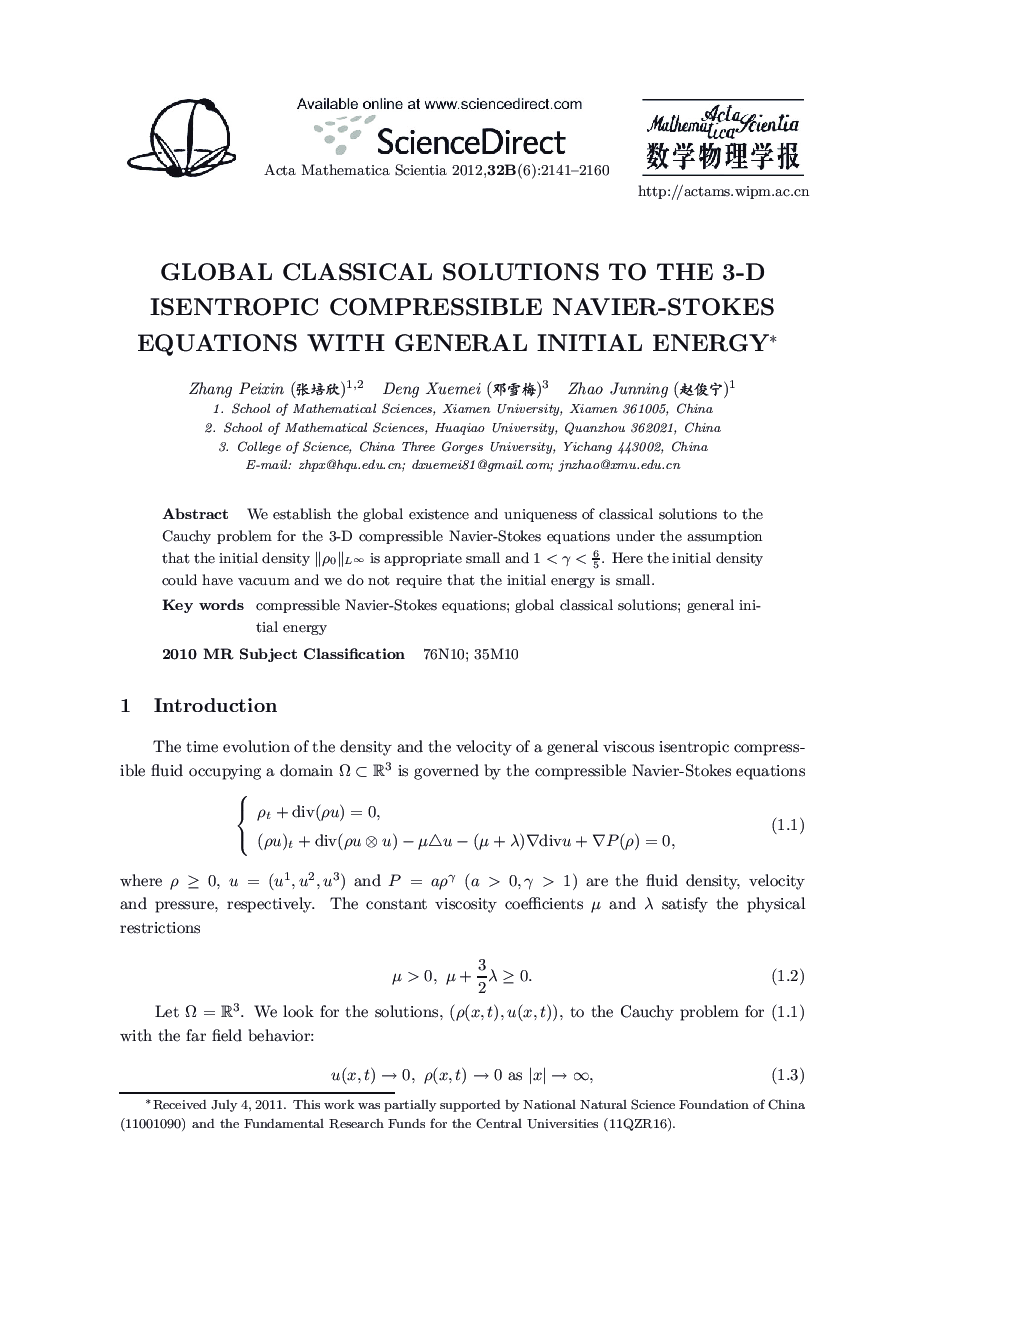 Global Classical Solutions to the 3-D Isentropic Compressible Navier-Stokes Equations with General Initial Energy 